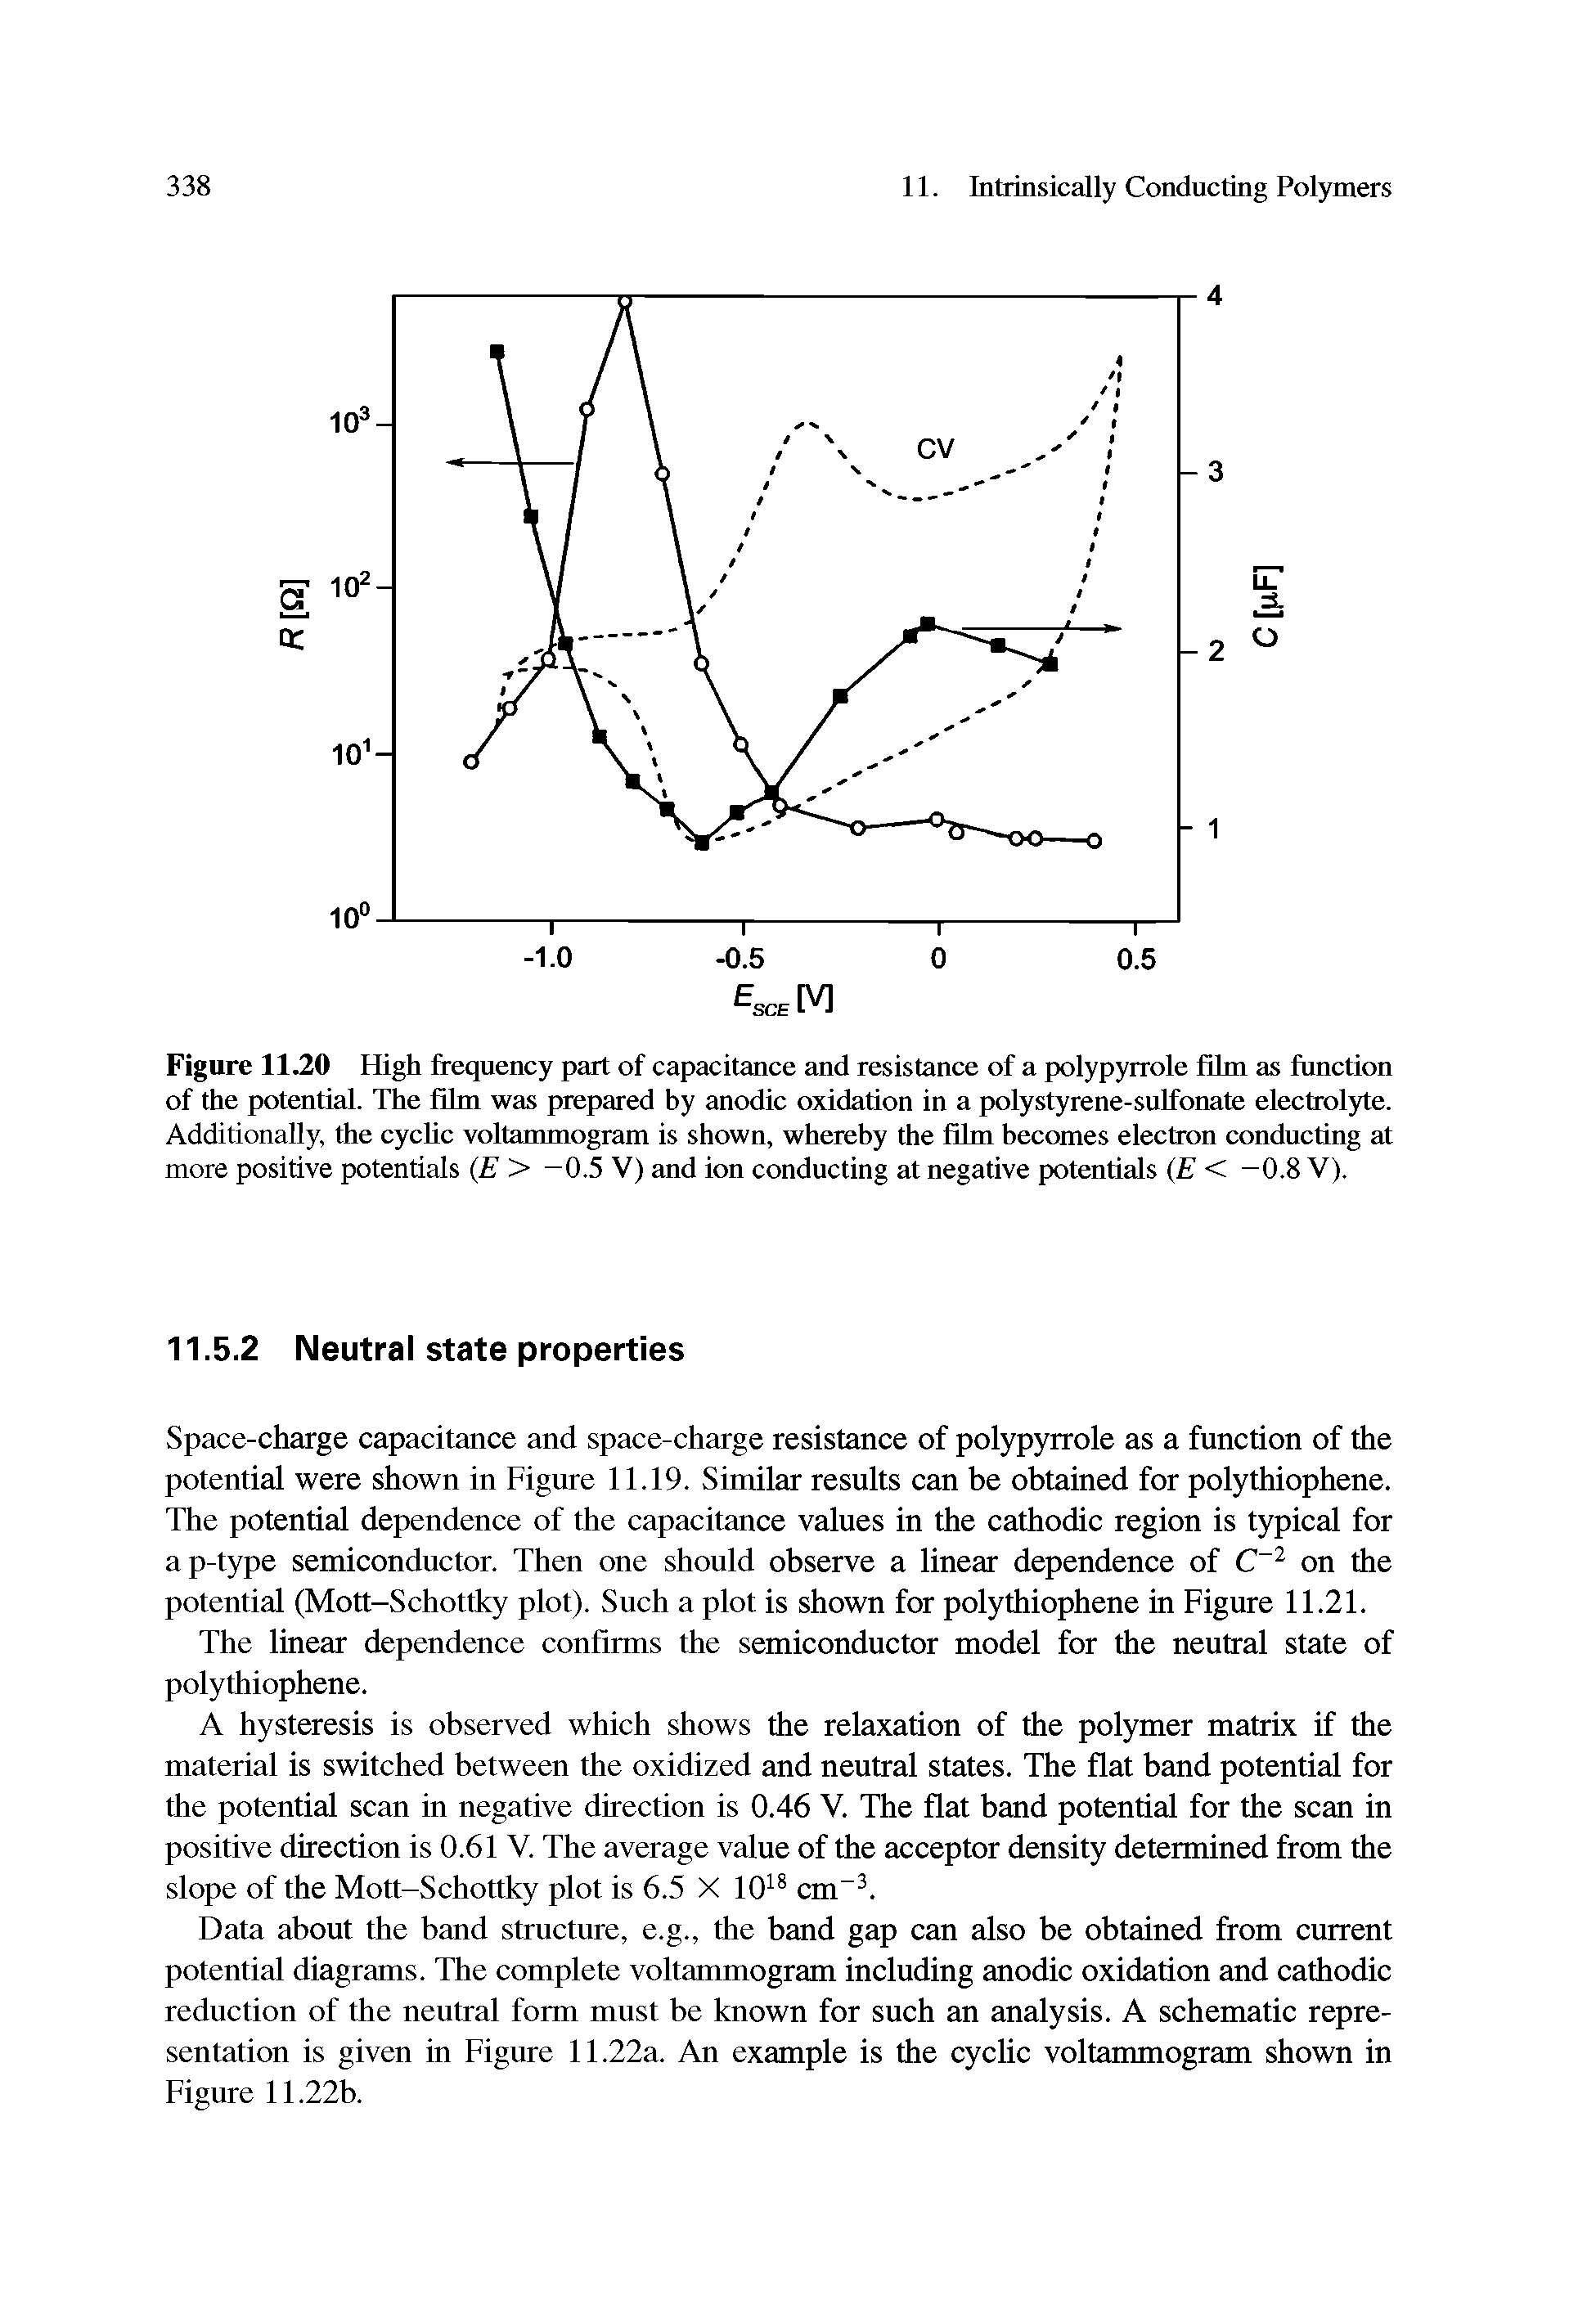 Figure 11.20 High frequency part of capacitance and resistance of a polypyrrole film as function of the potential. The film was prepared by anodic oxidation in a polystyrene-sulfonate electrolyte. Additionally, the cyclic voltammogram is shown, whereby the film becomes electron conducting at more positive potentials (E > -0.5 V) and ion conducting at negative potentials (E < —0.8 V).